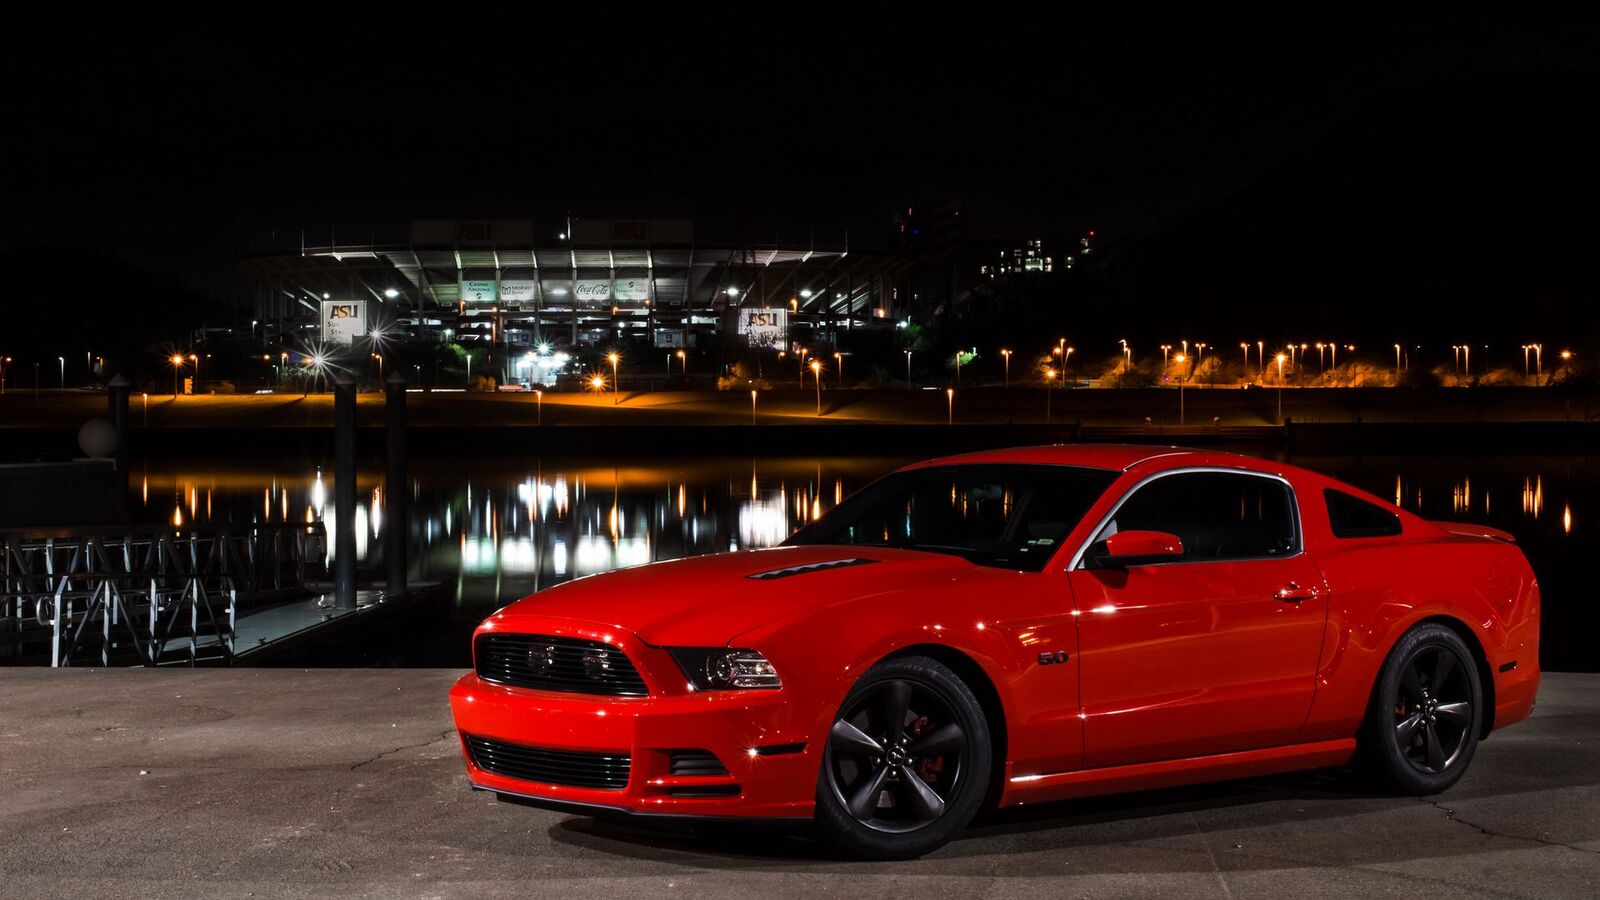 ford_mustang_gt_side_view_red_94340_1920x1080.jpg